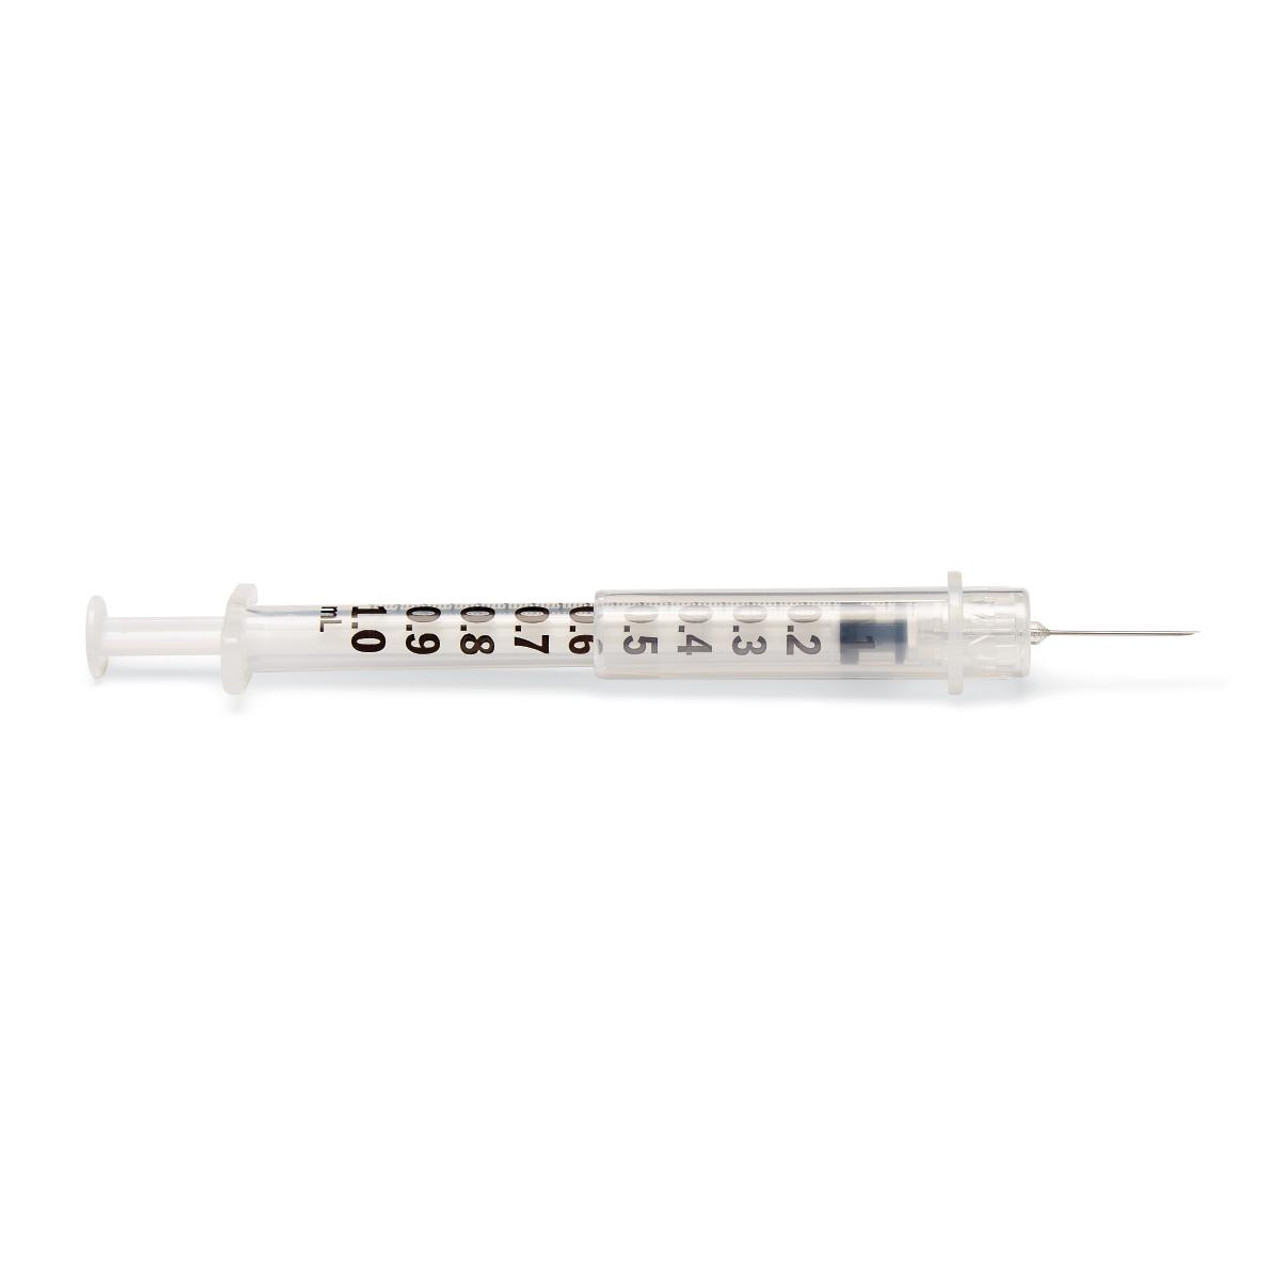 1cc Safety Syringe with Permanently Attached Needle 25ga x 5/8 inch - Each